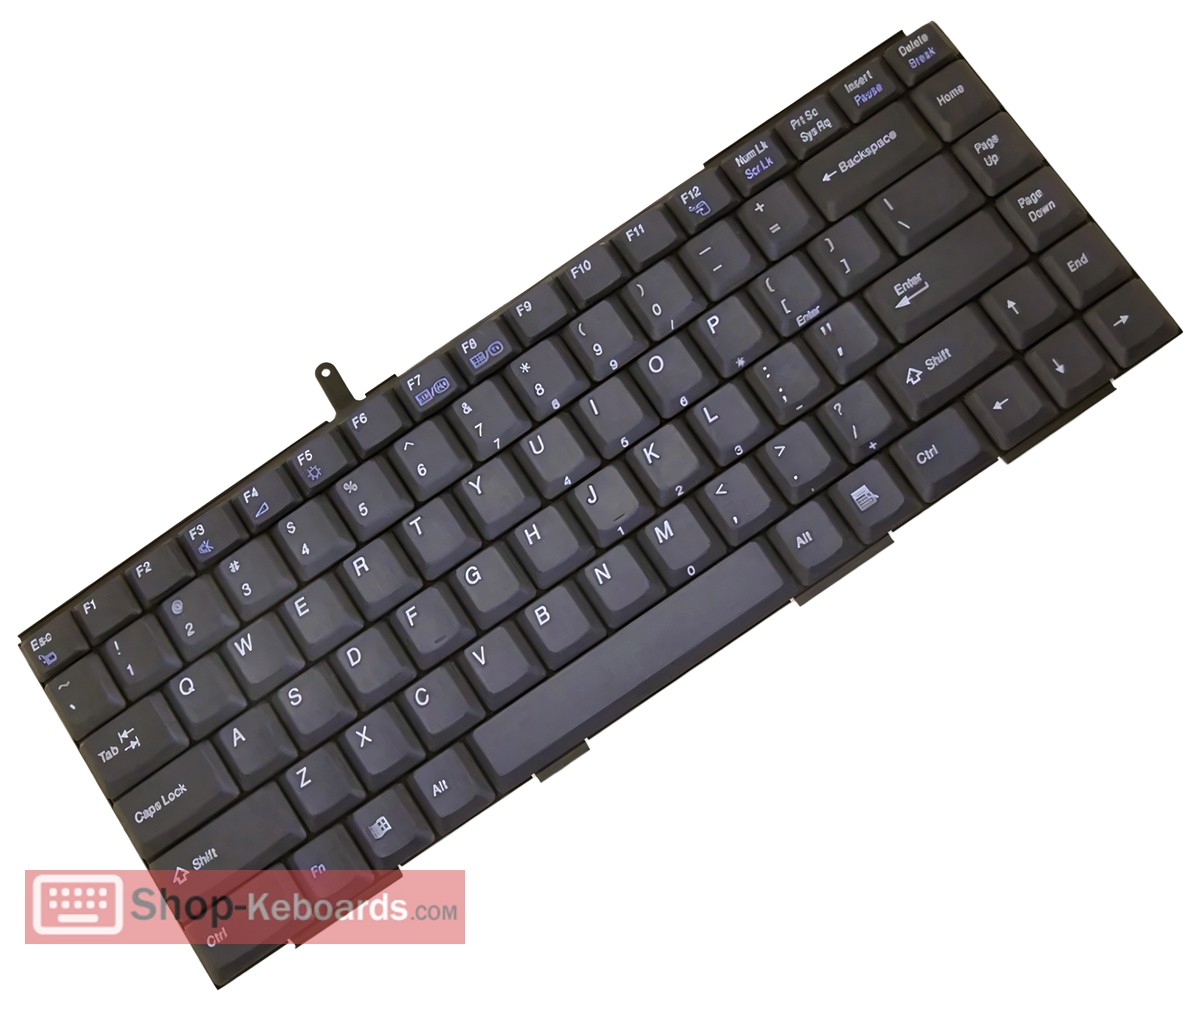 Sony VAIO PCG-F280 Keyboard replacement